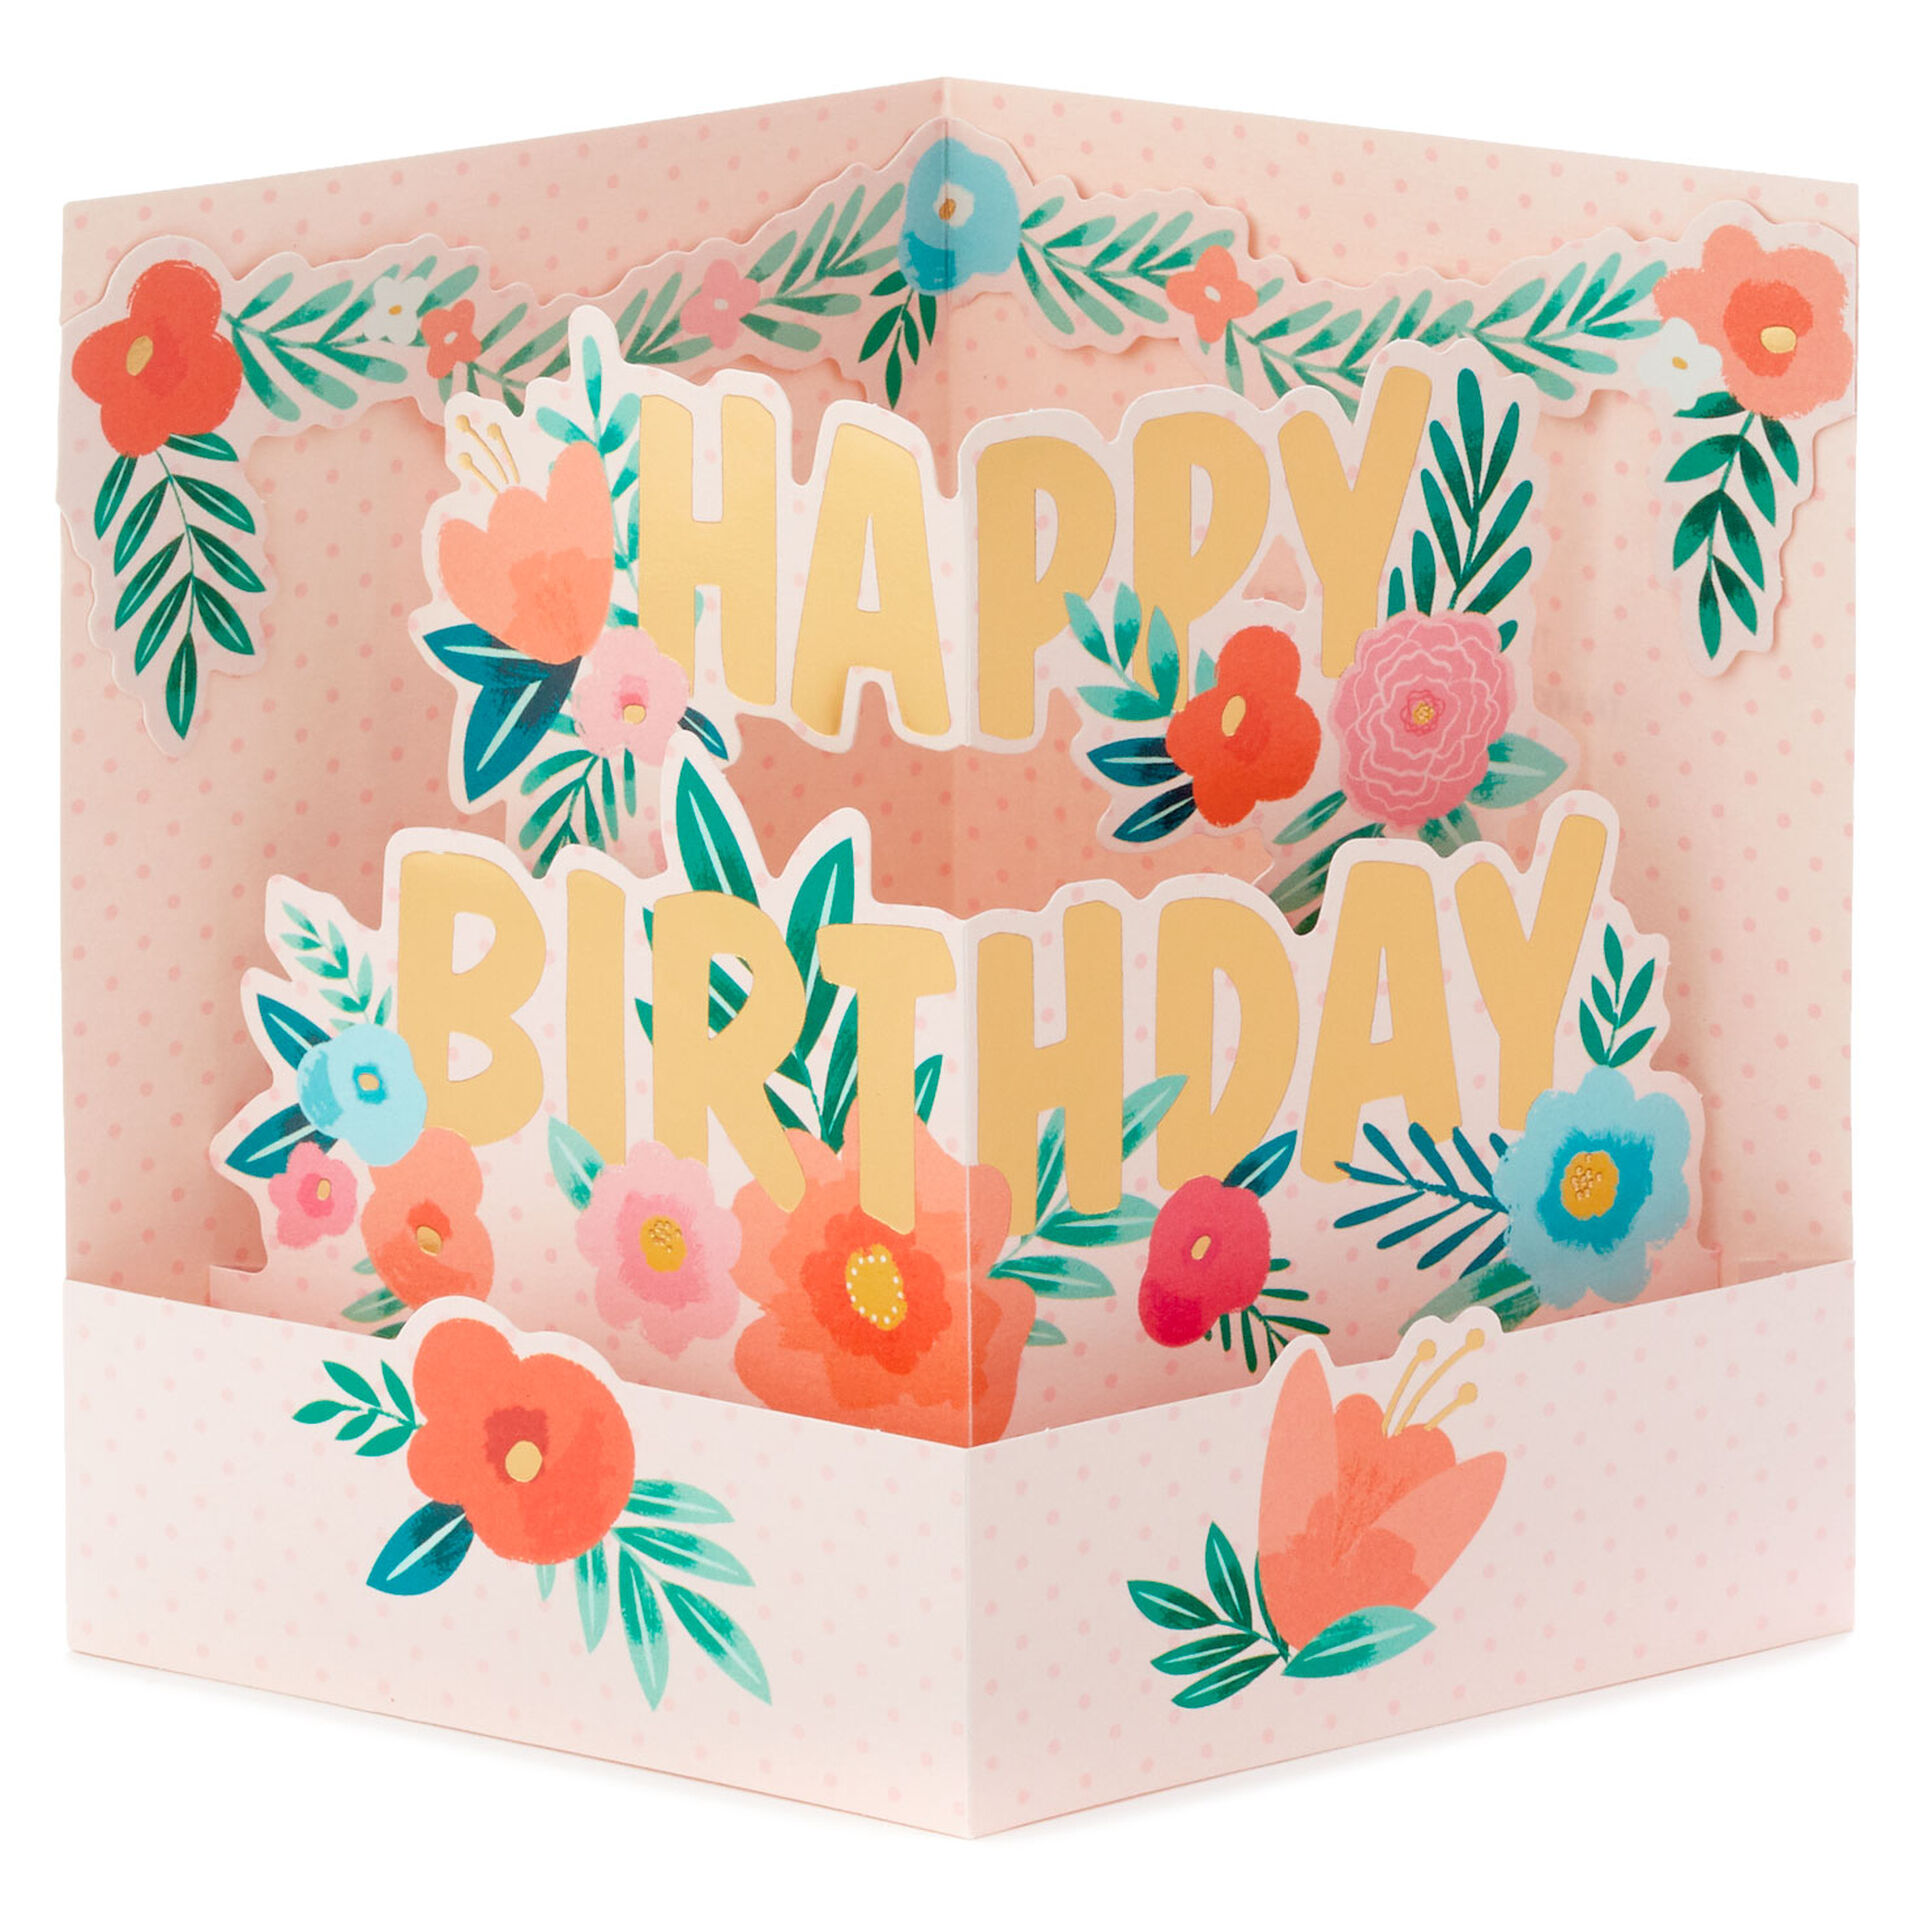 Flowers-3D-PopUp-Birthday-Card-for-Her_699WDR1155_03